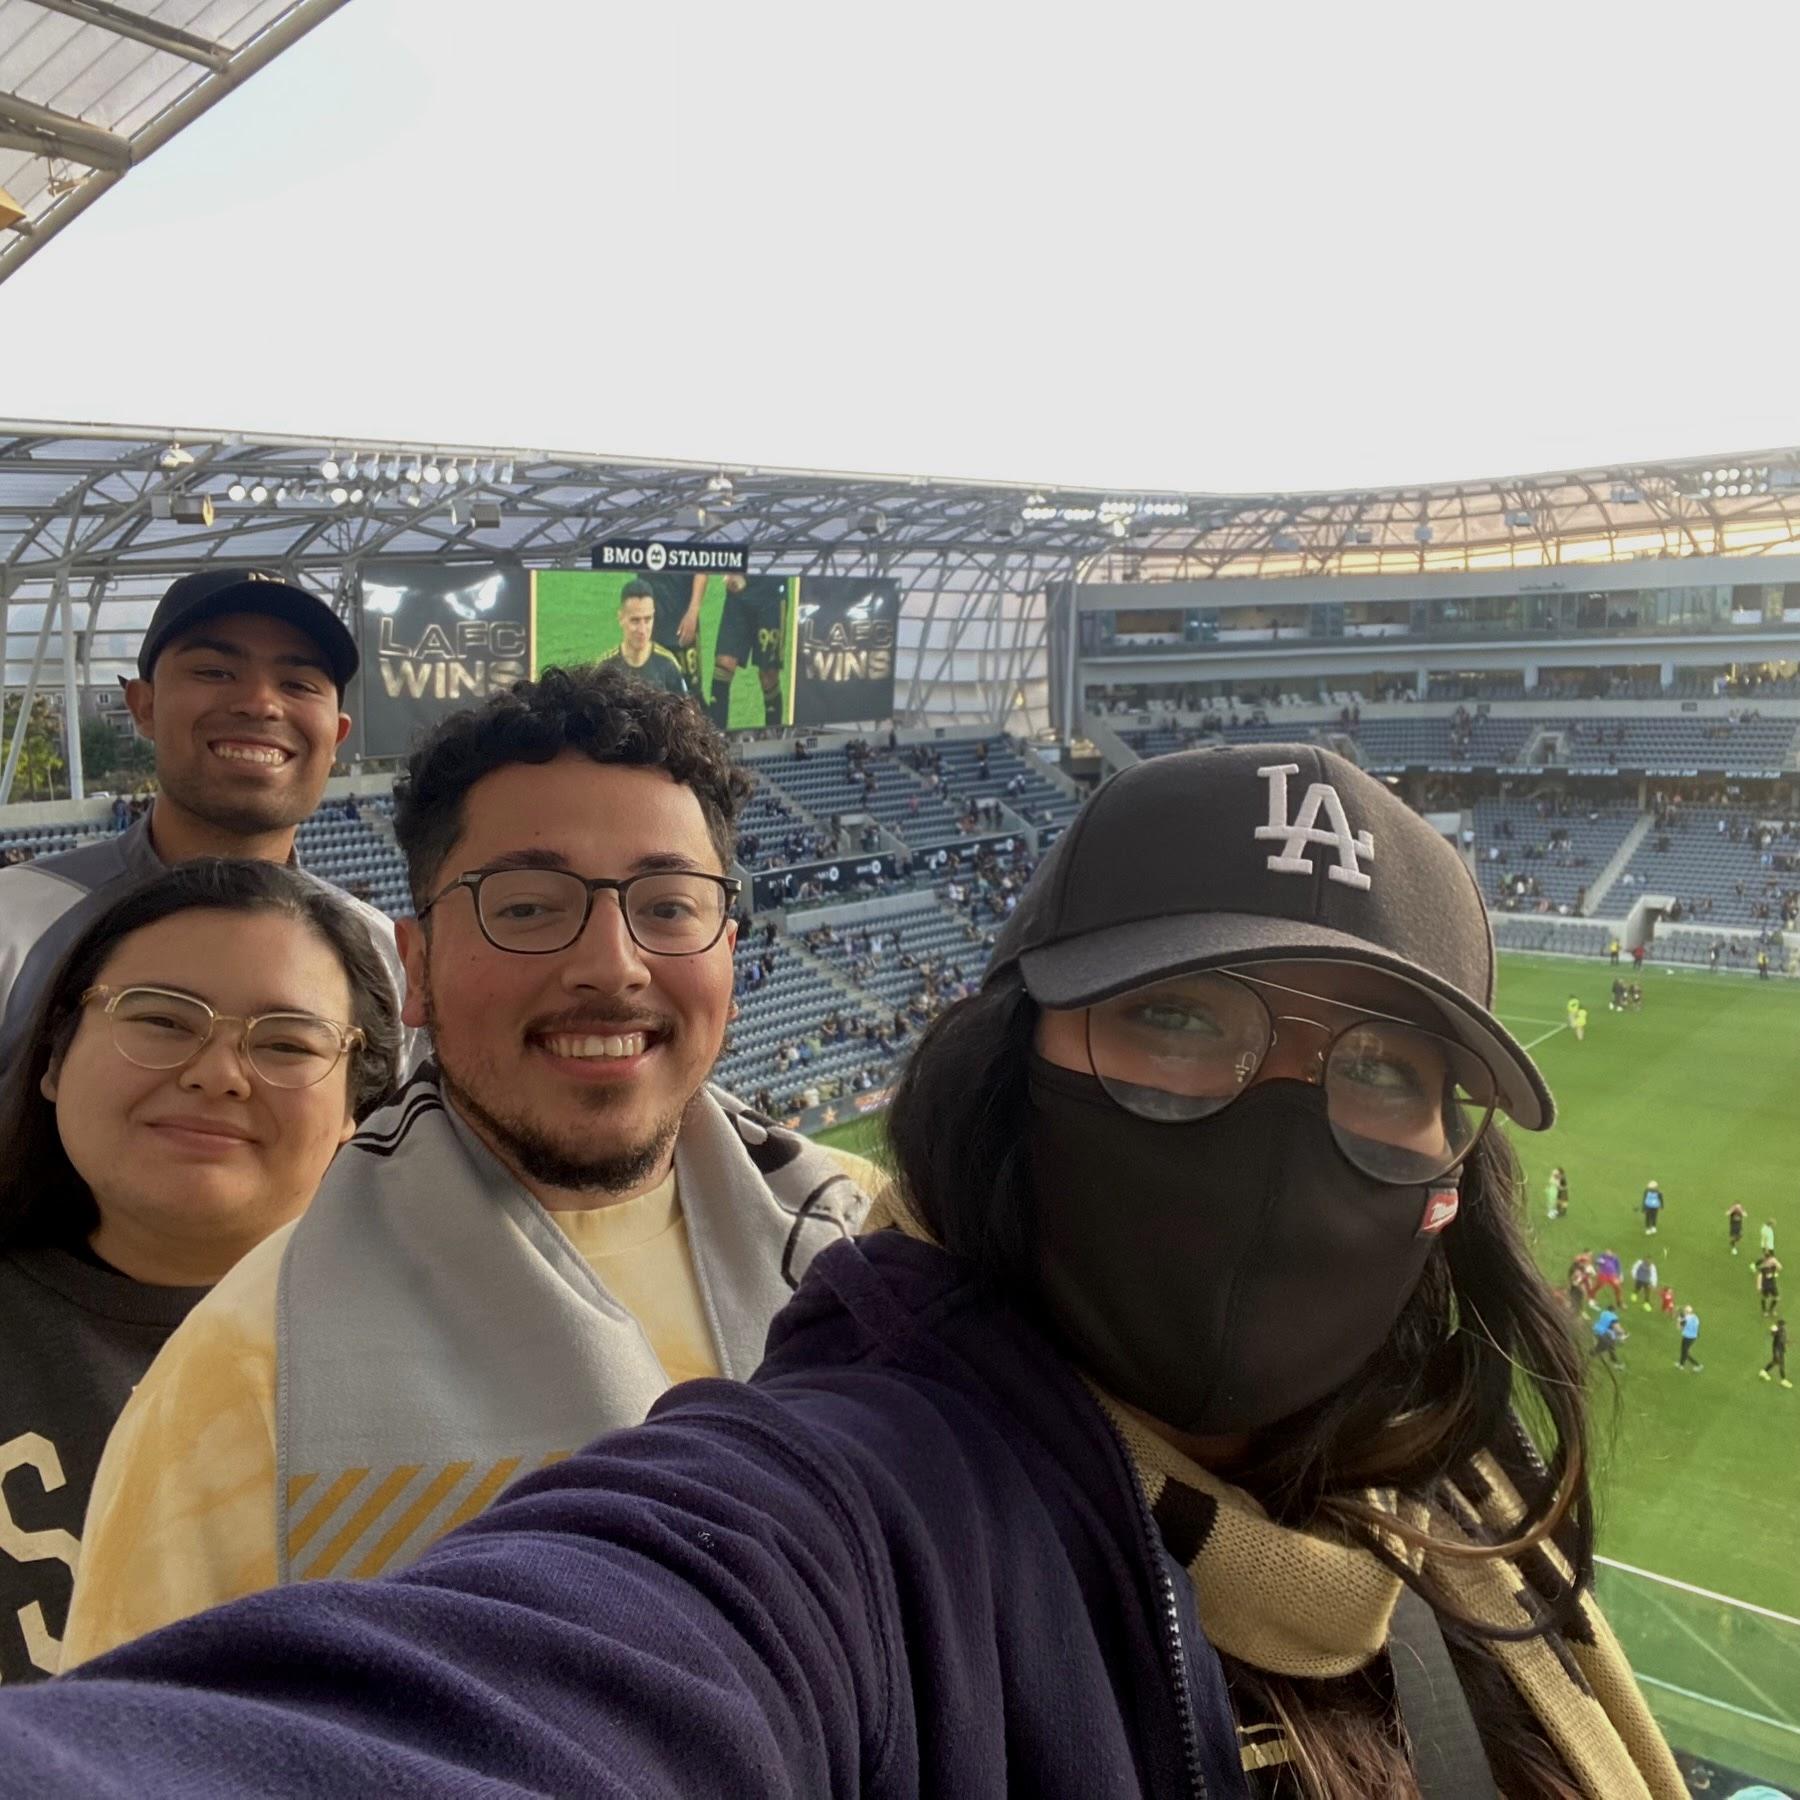 Went to our First LAFC game with Friends